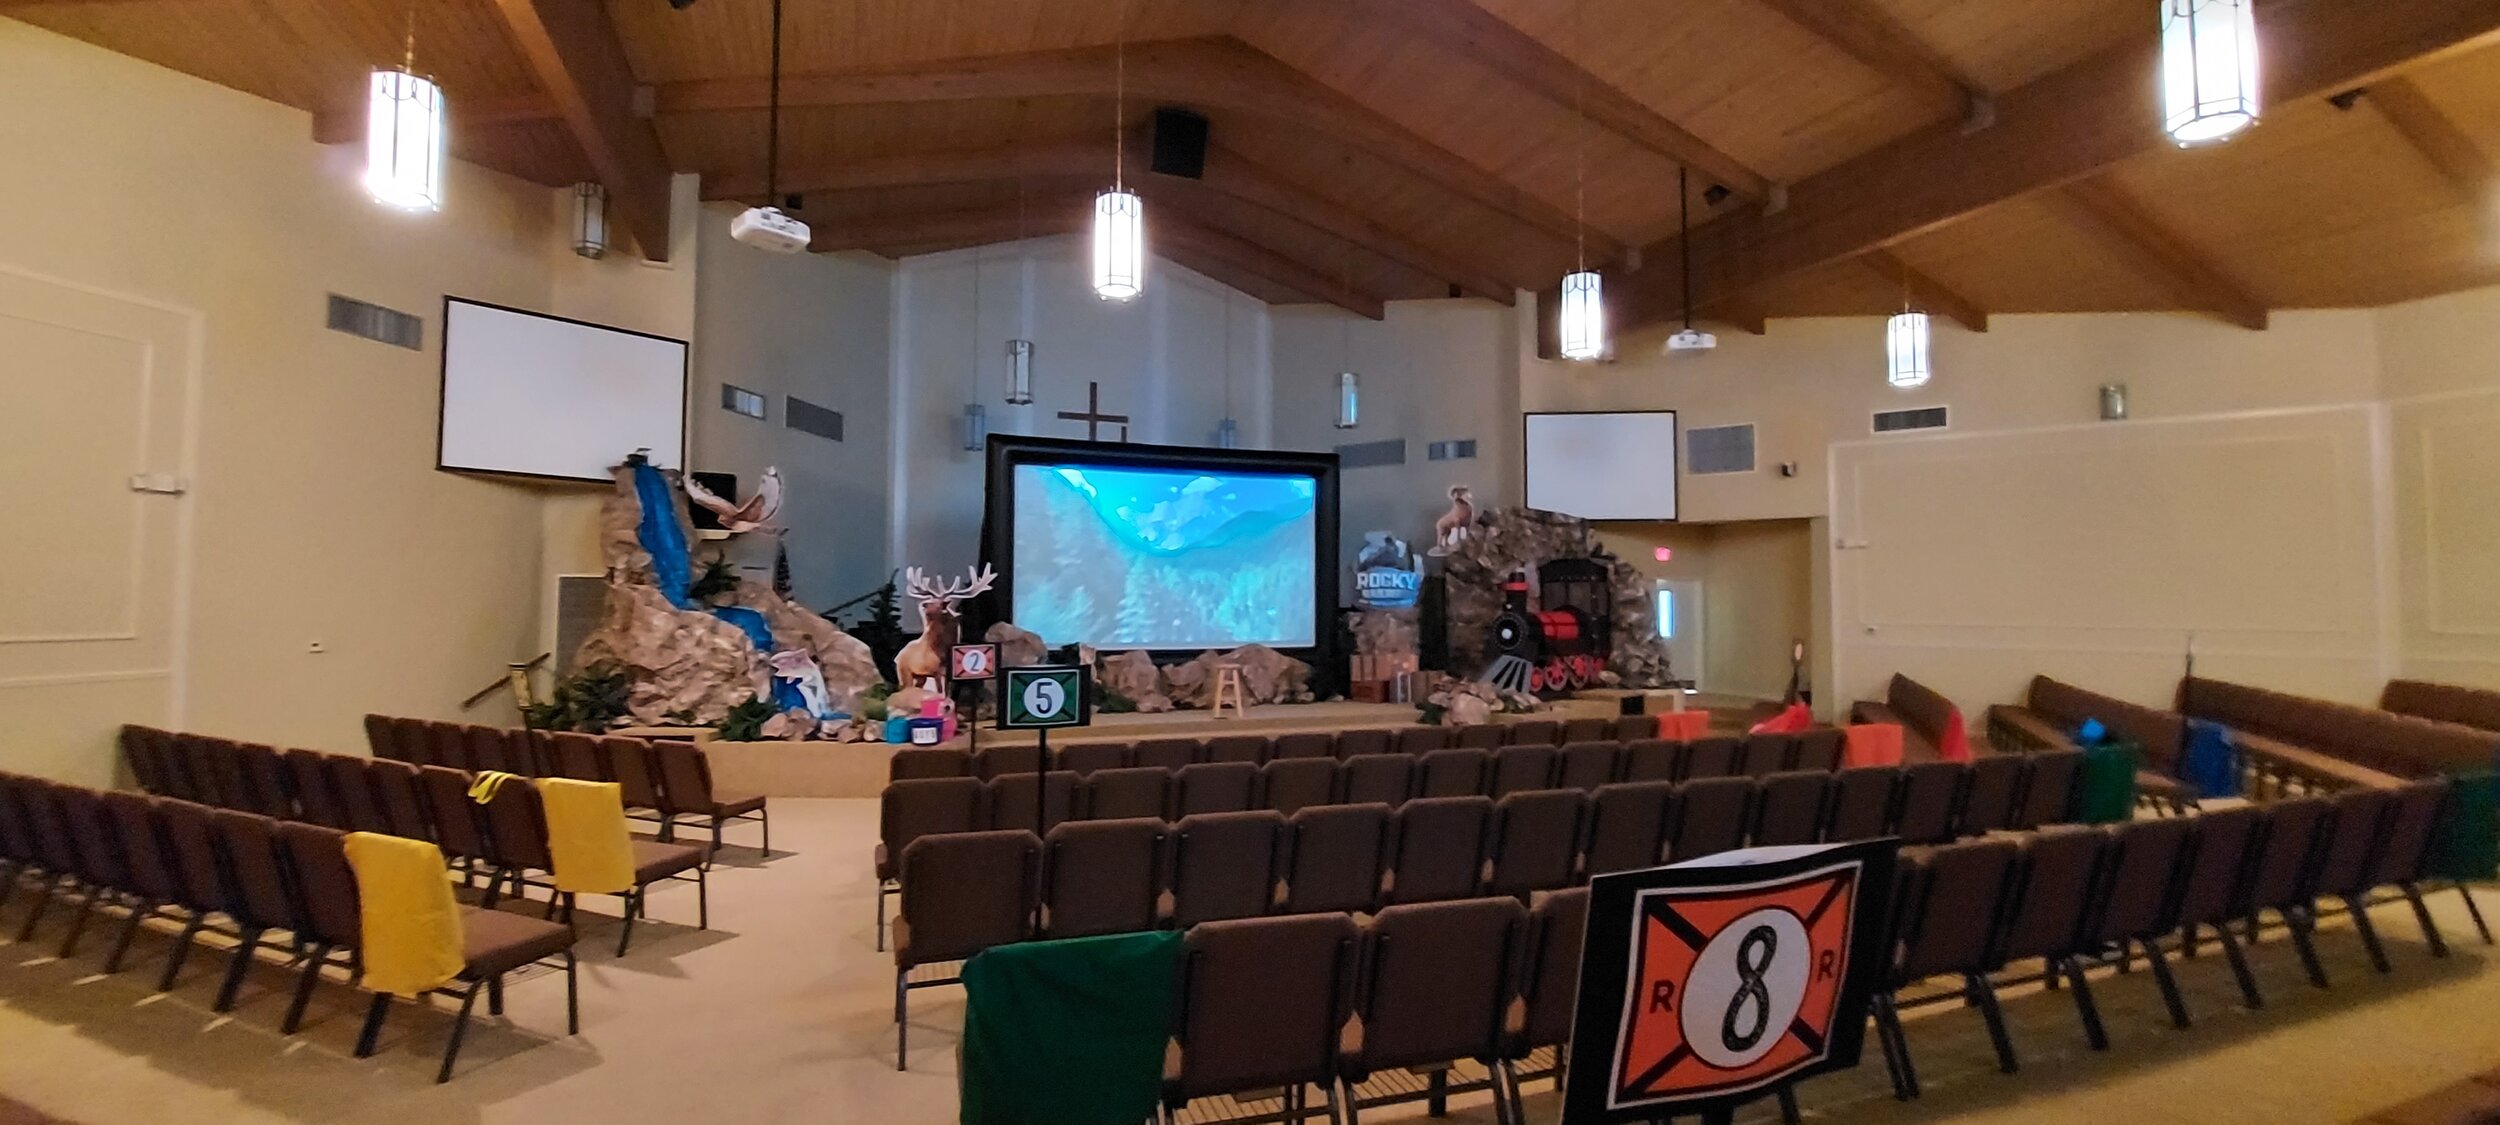 Vacation Bible School - Projections